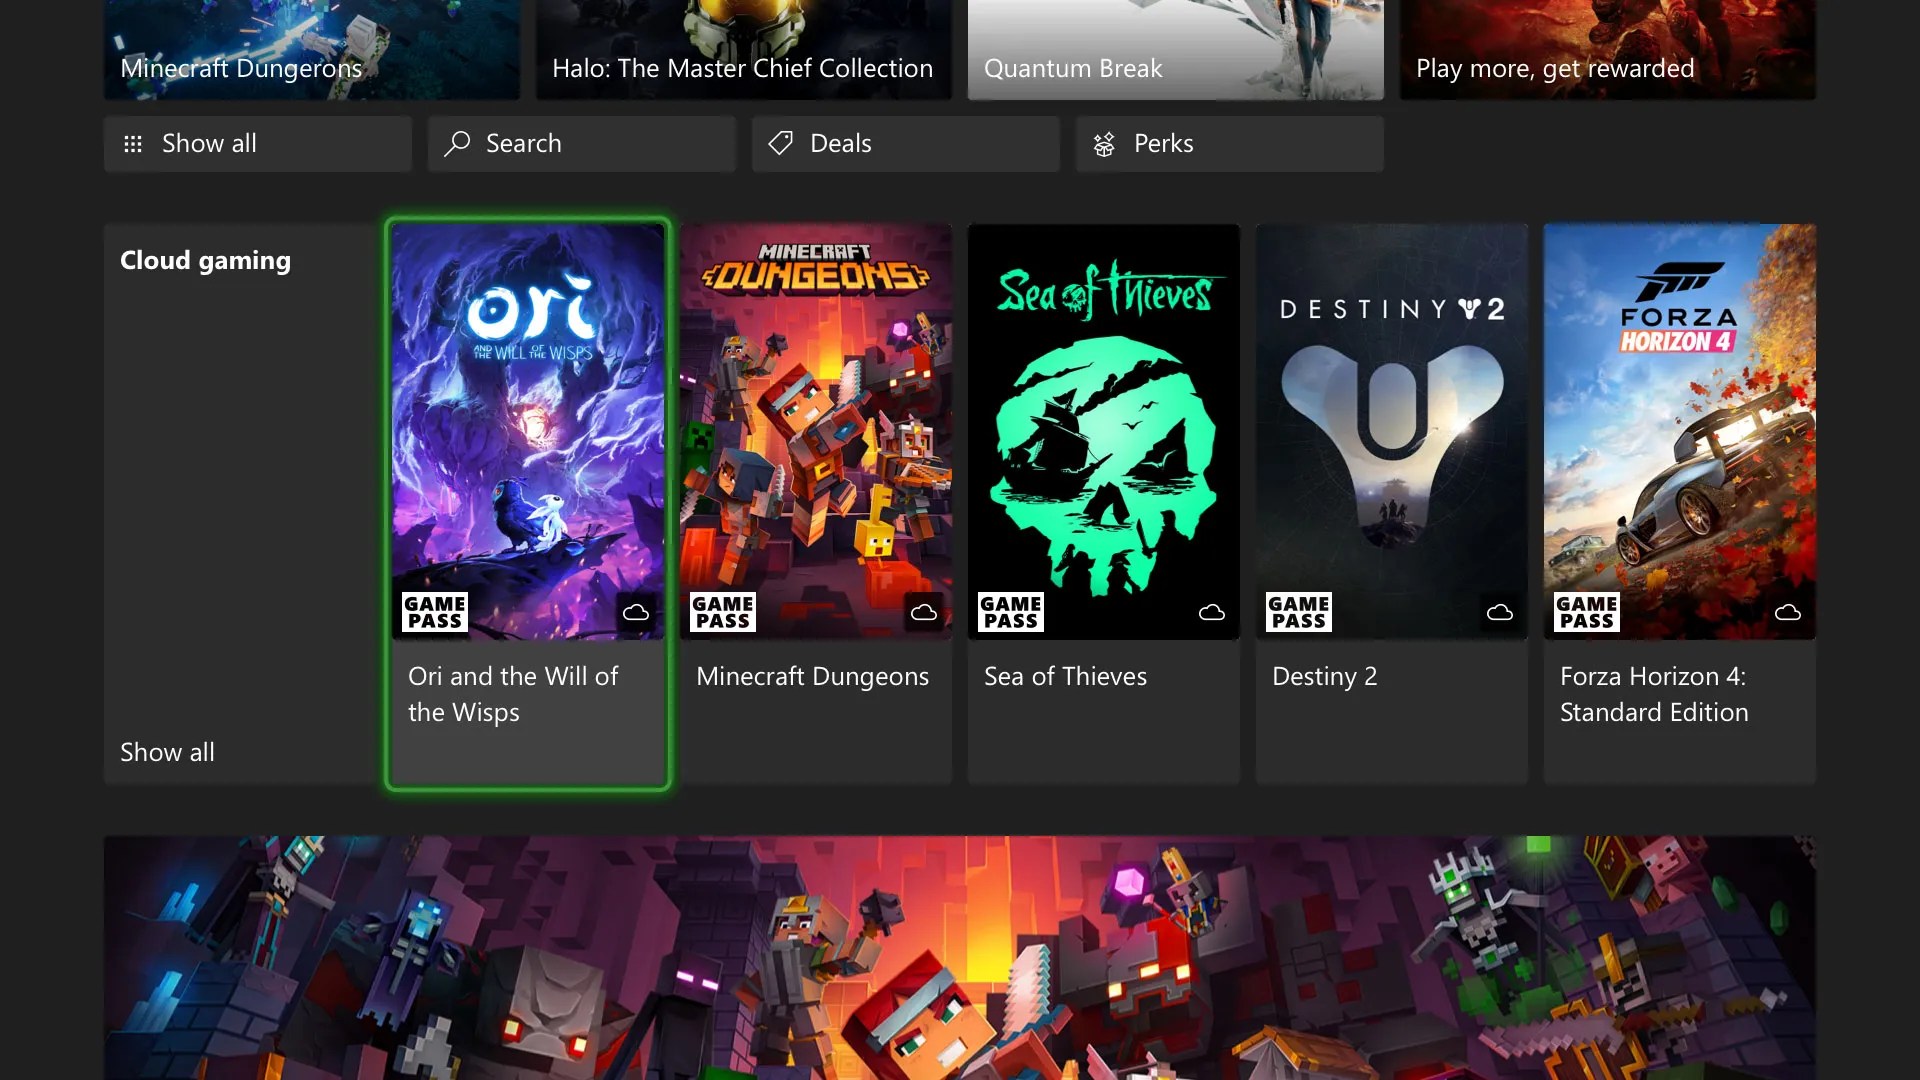 Xbox Game Pass July: Xbox Game Pass in July 2023: Here's a complete guide  of games joining and leaving Xbox Game Pass world - The Economic Times